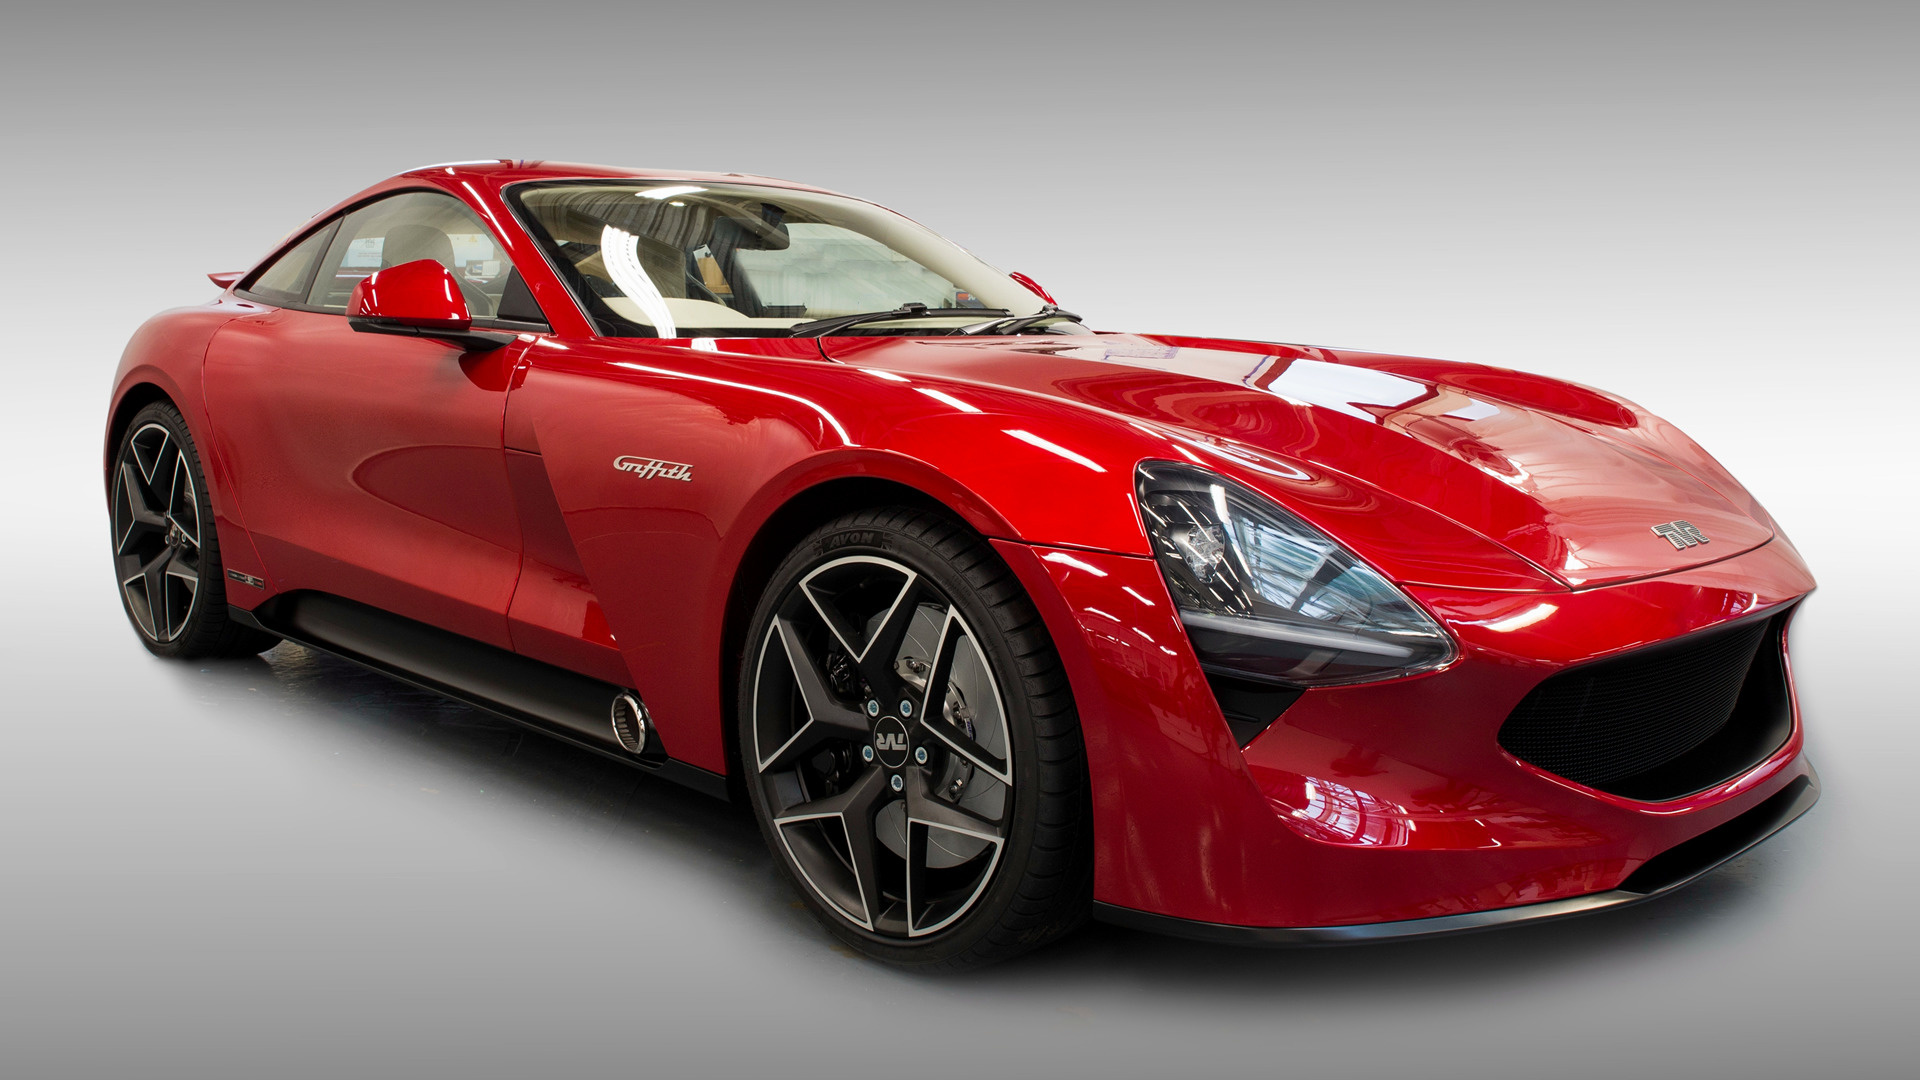 Tvr Griffith Wallpaper And HD Image Car Pixel